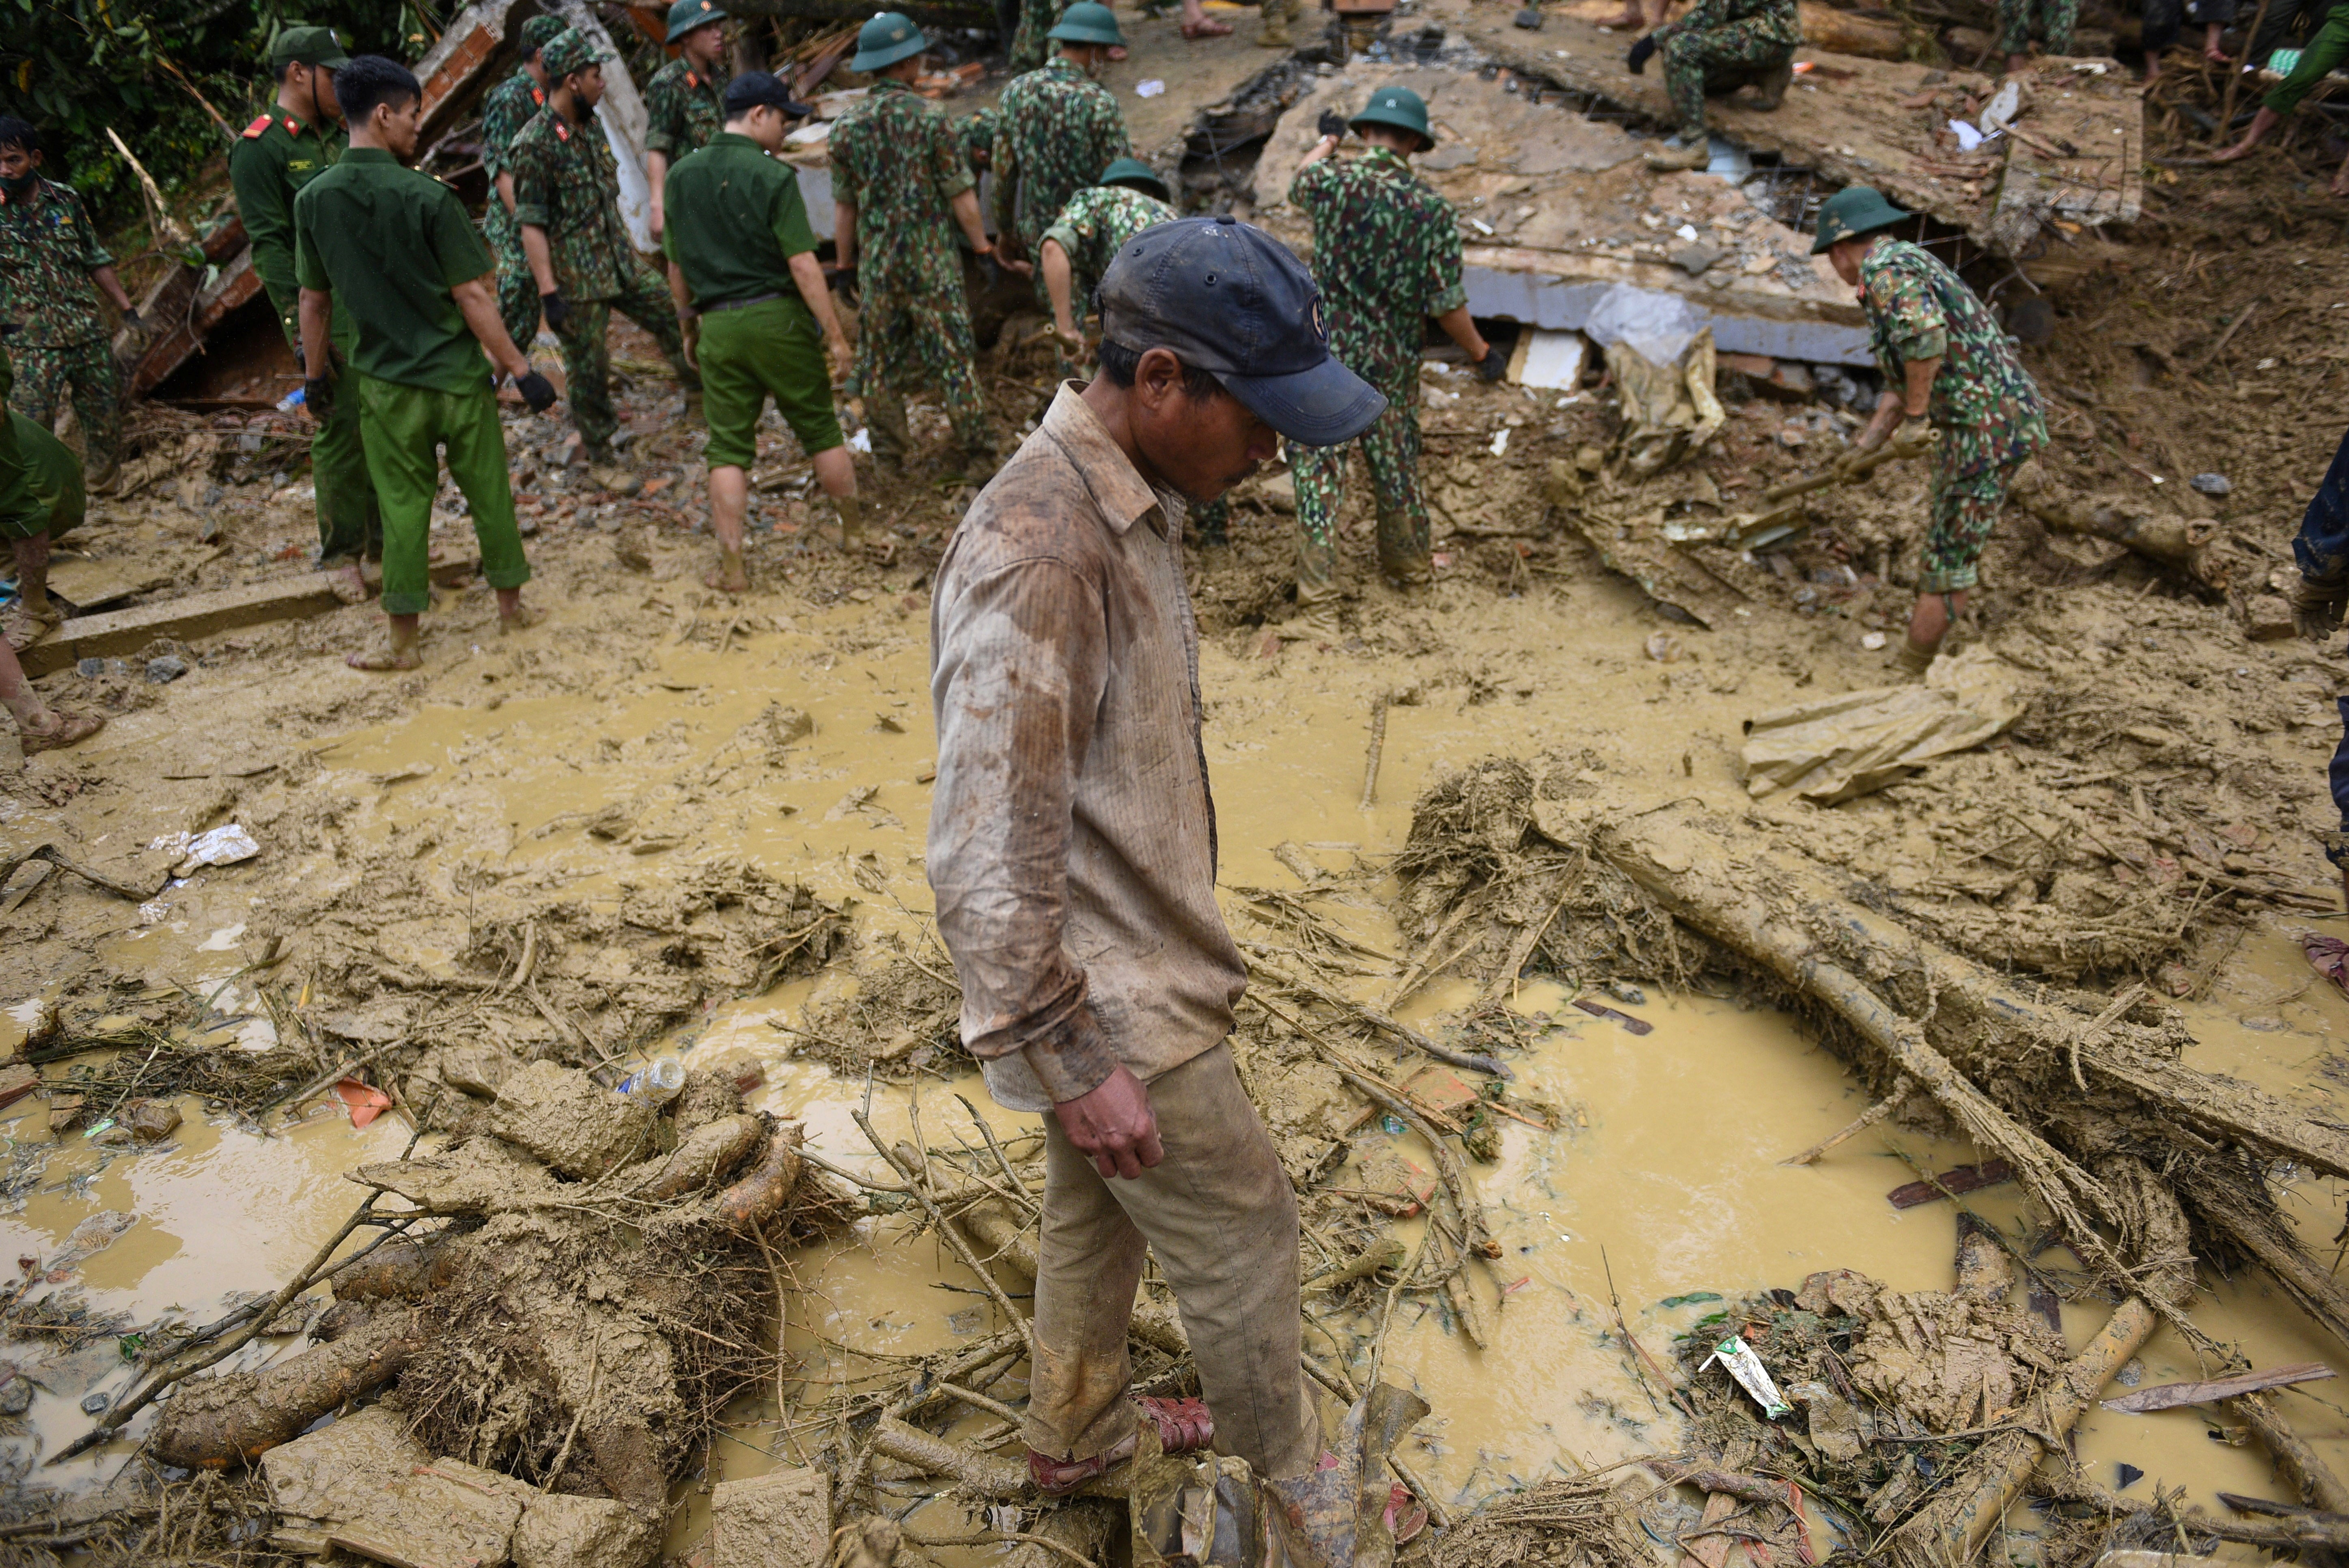 Rescue teams have been deployed to look for dozens of people feared dead in at least seven mudslides